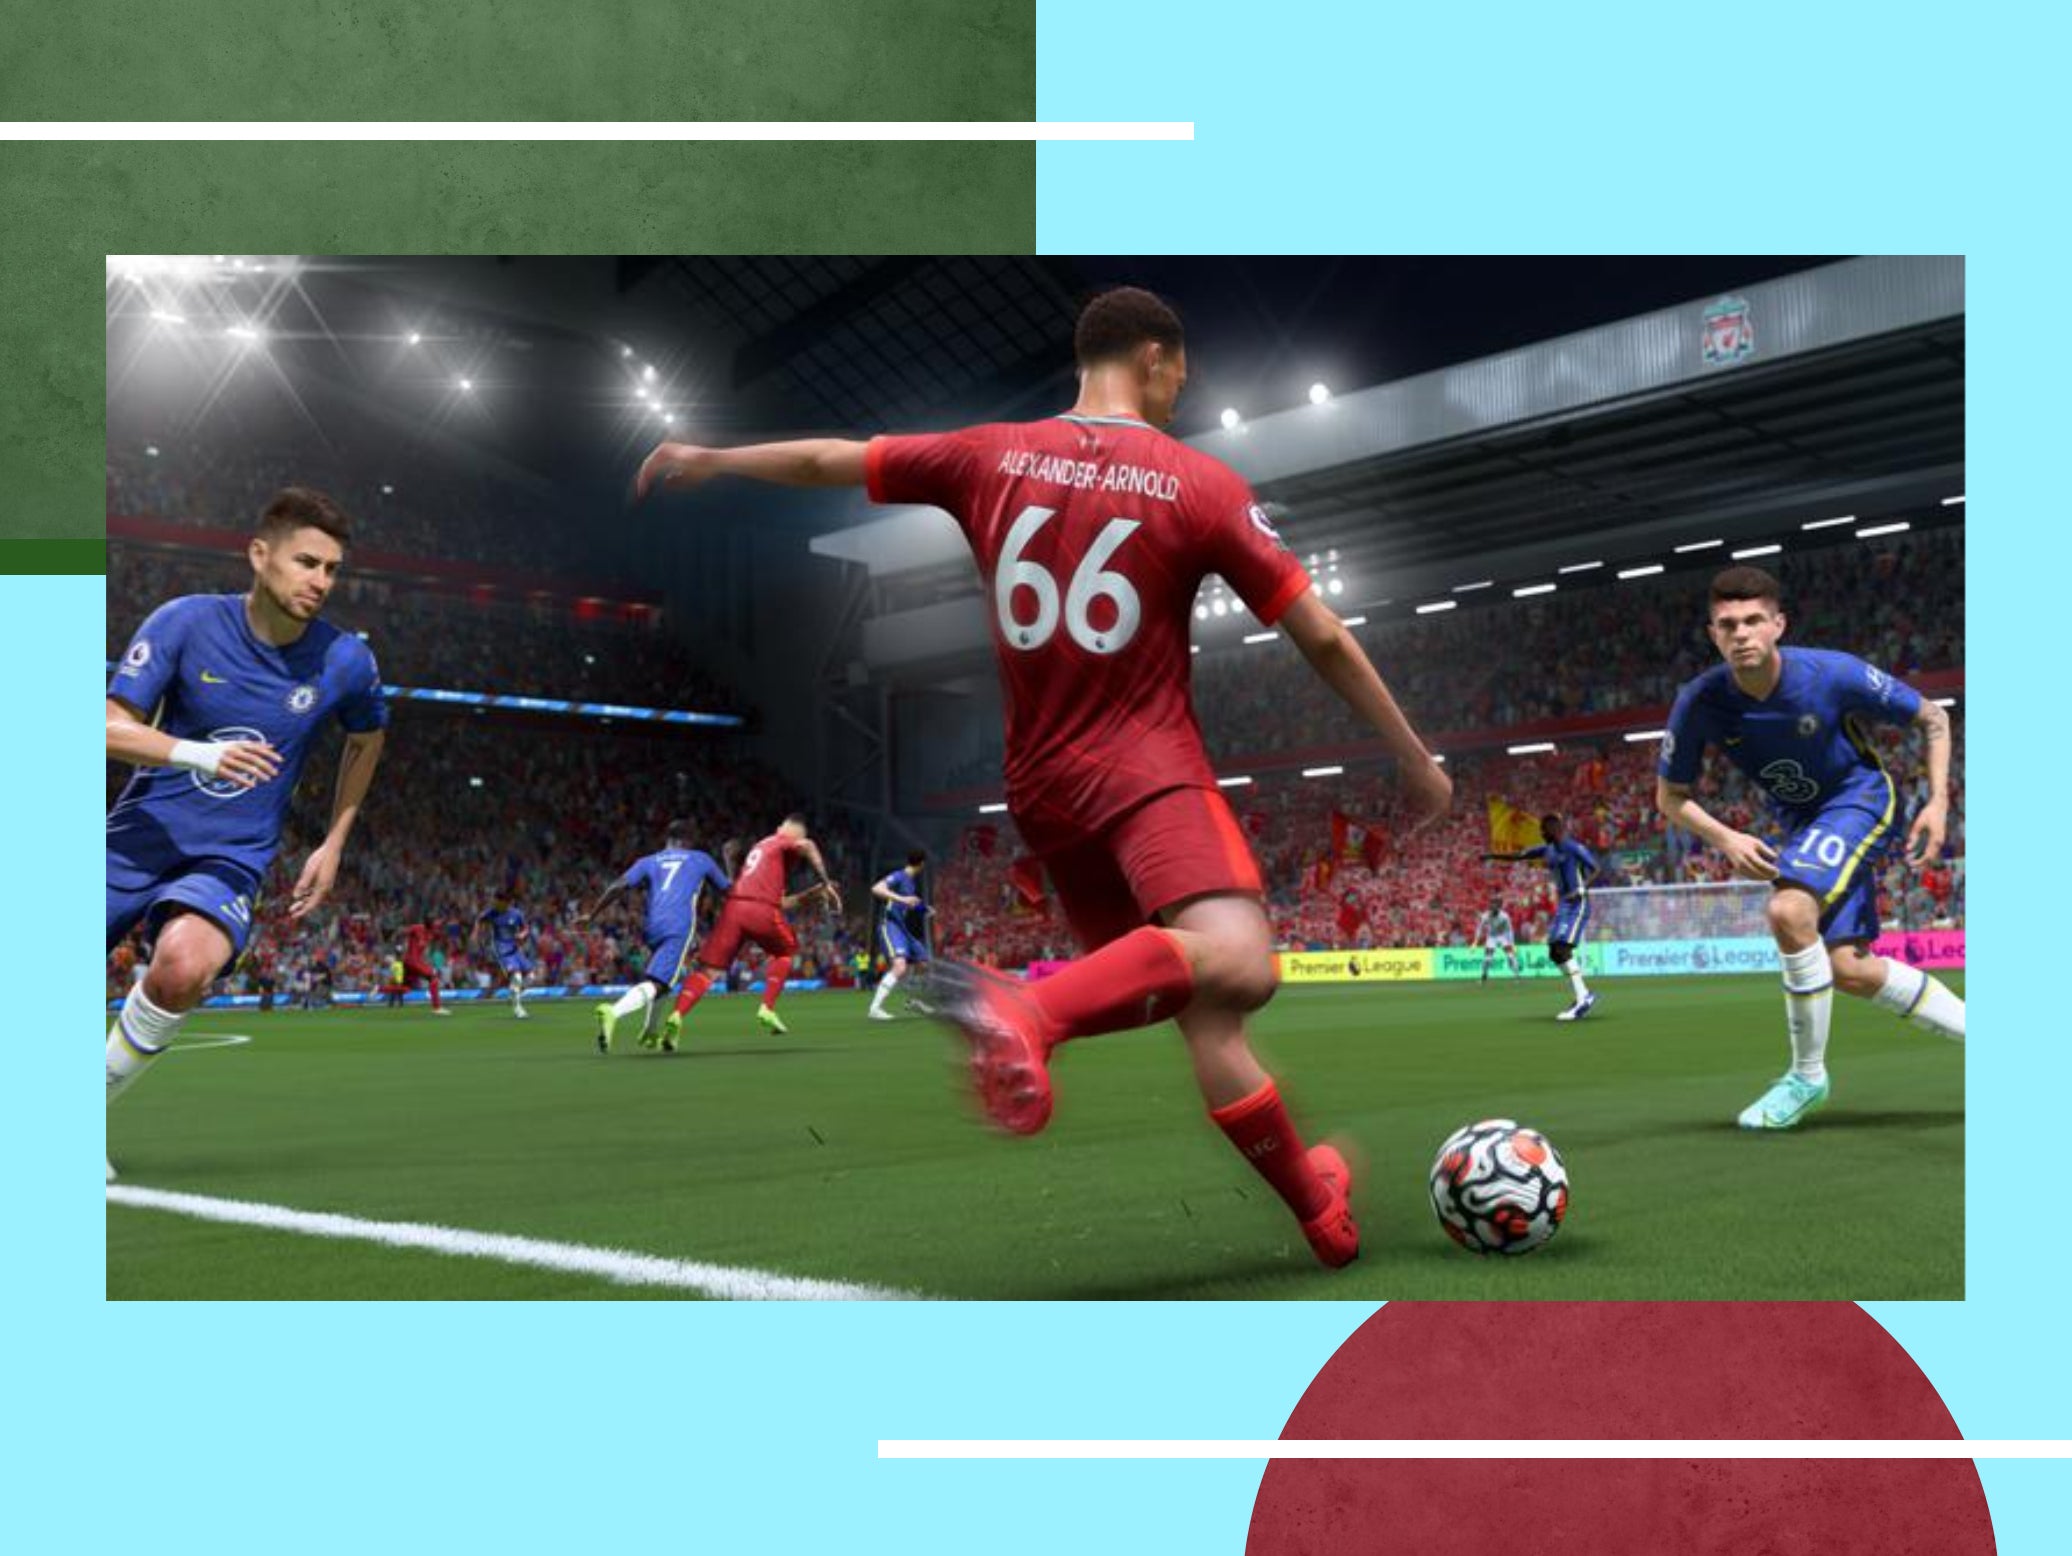 From God of War to Fifa 23, five games to play this winter